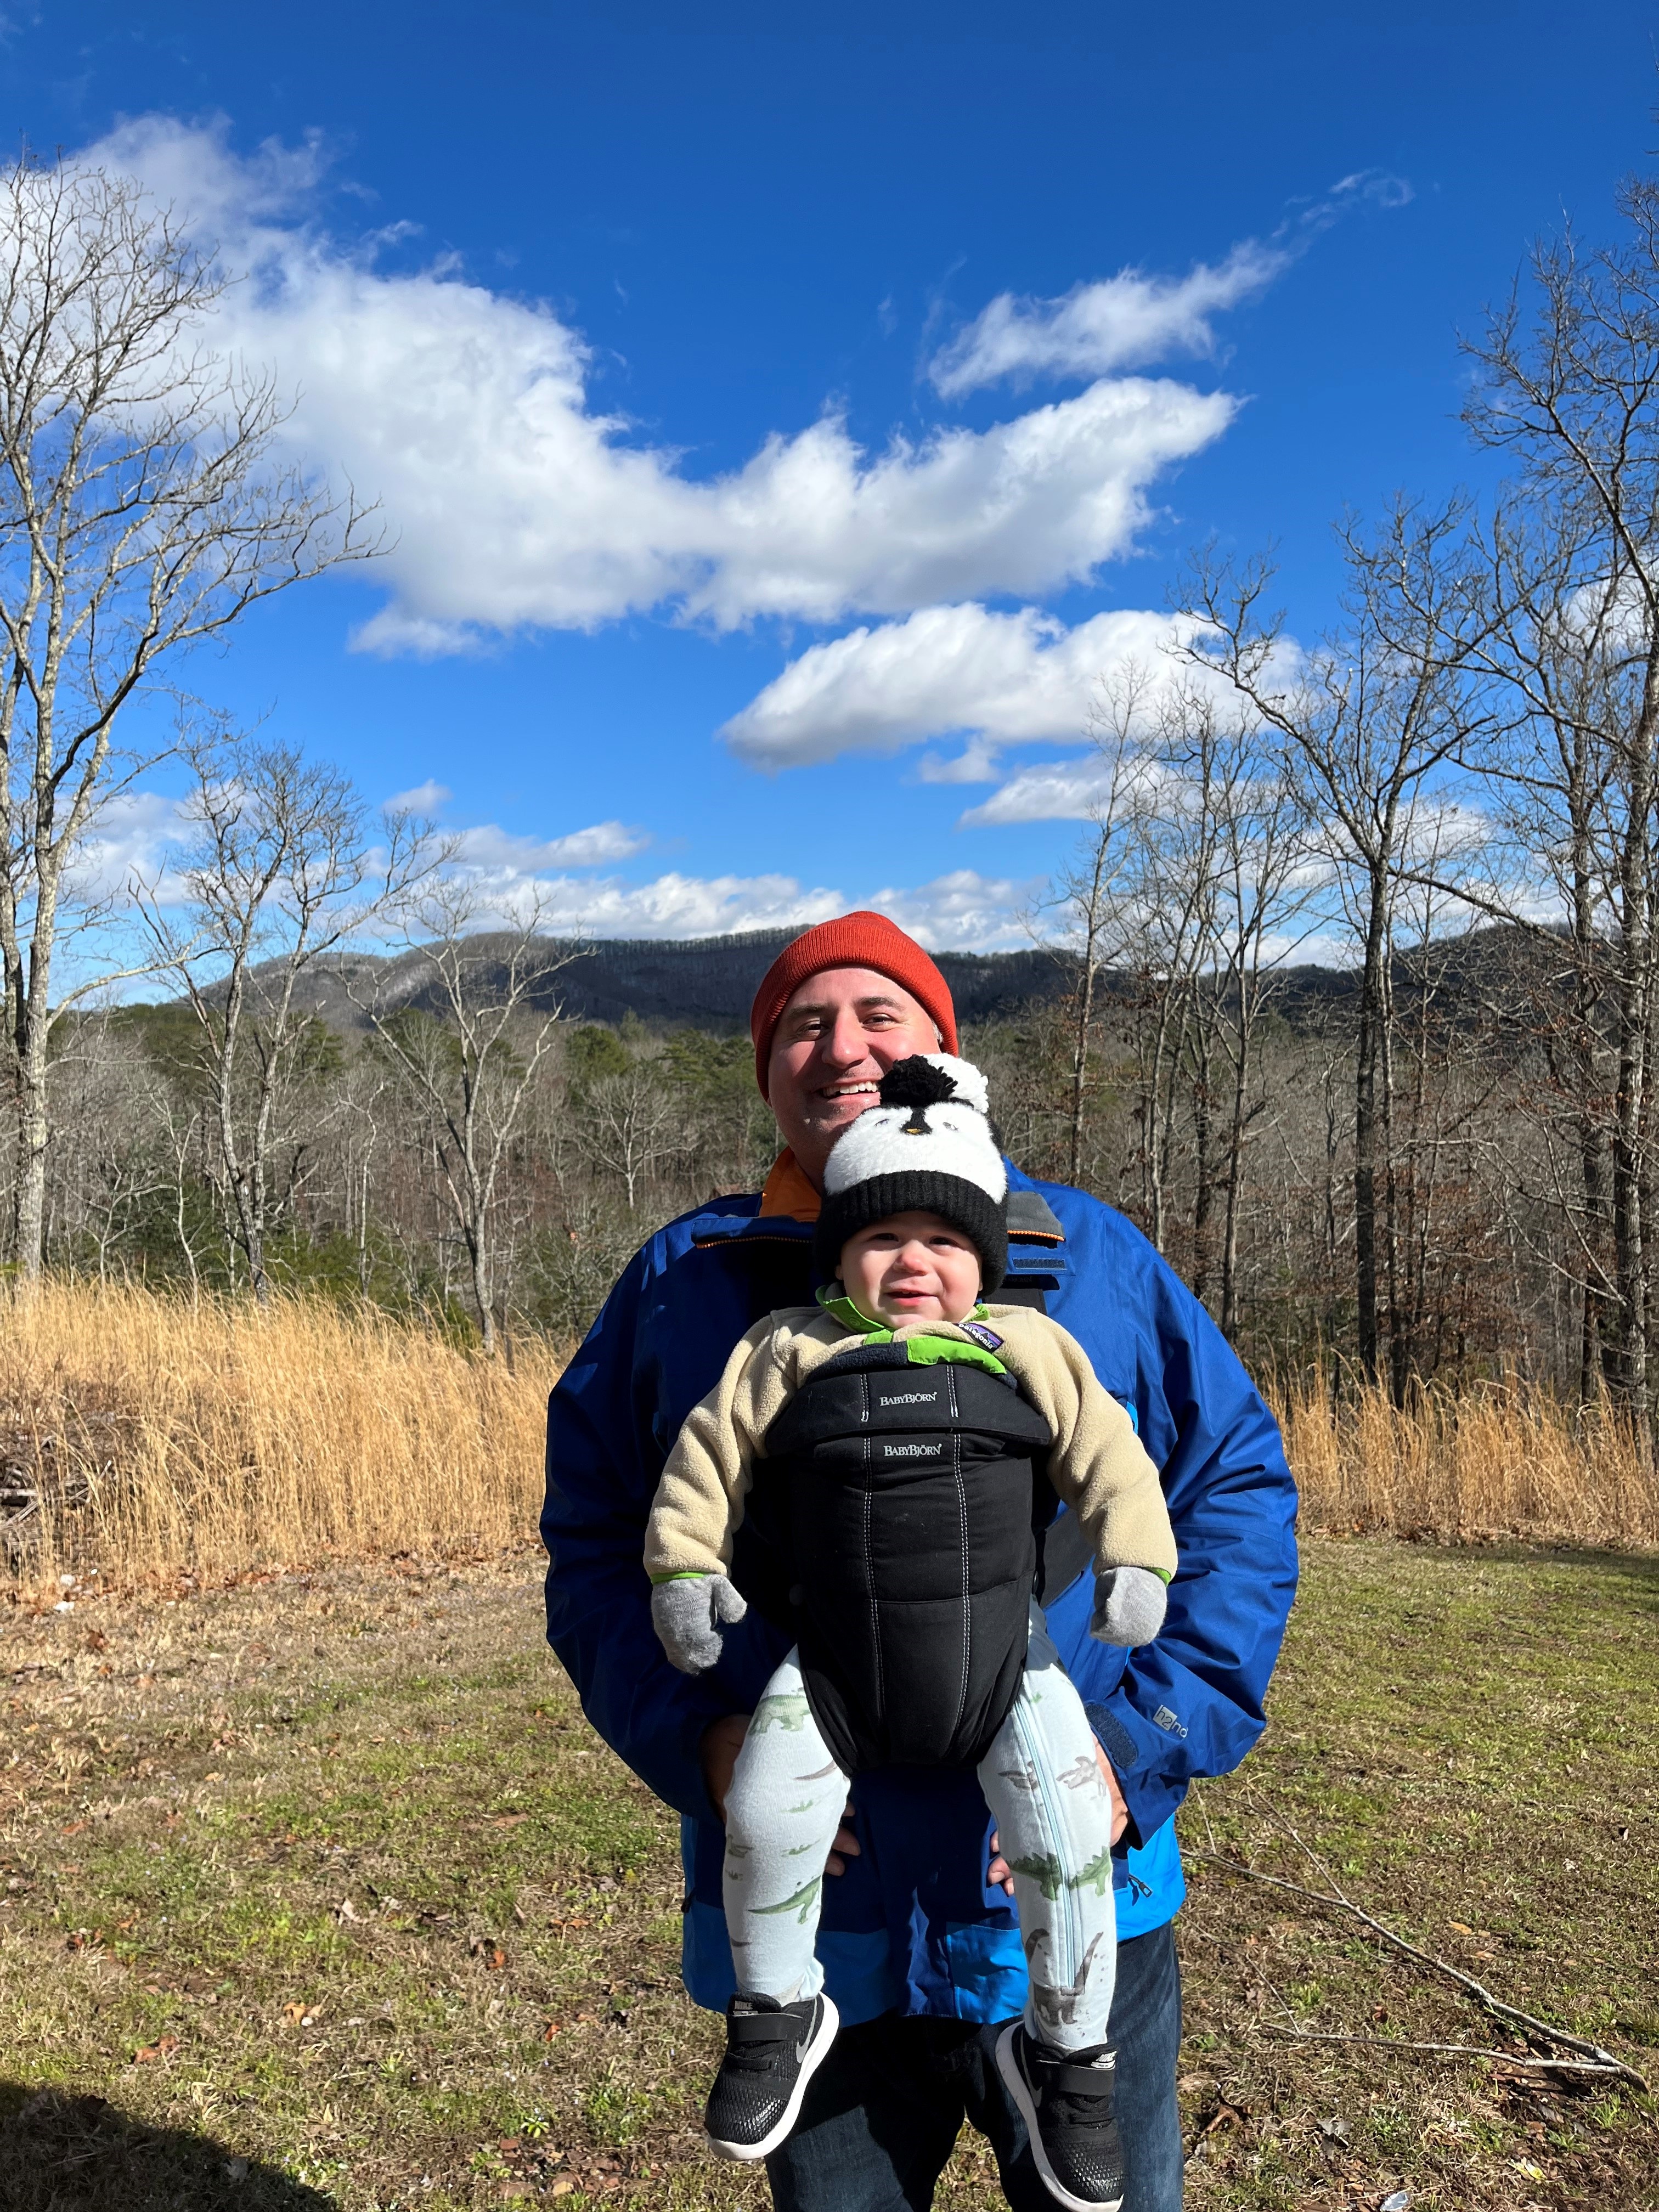 Justin and his son Henry hike in Blue Ridge, Ga.